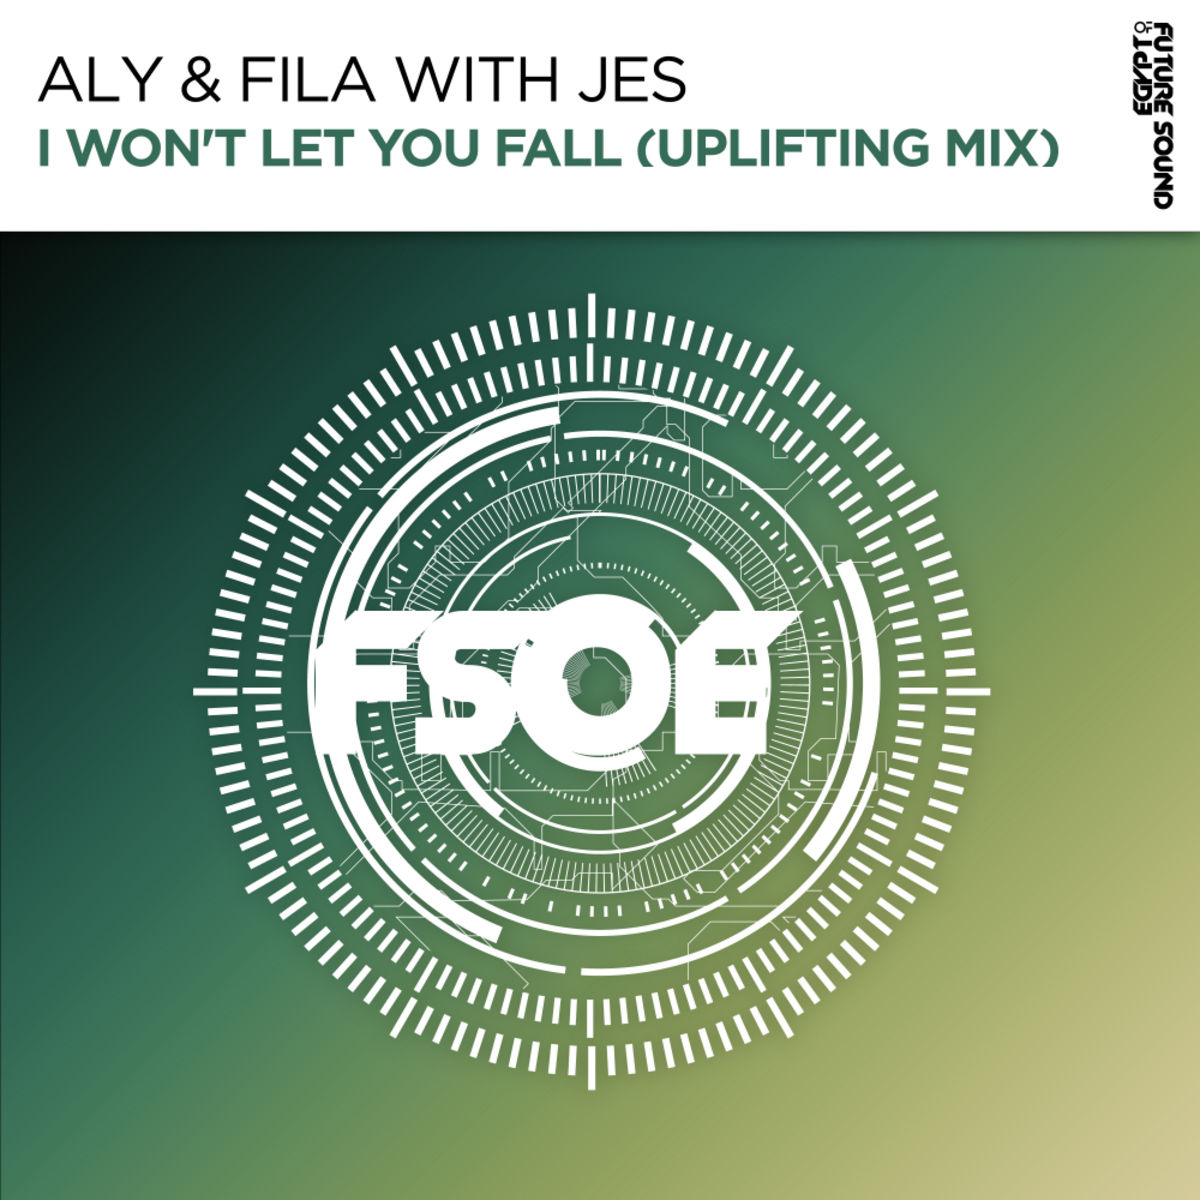 Aly & Fila with JES - I Won't Let You Fall